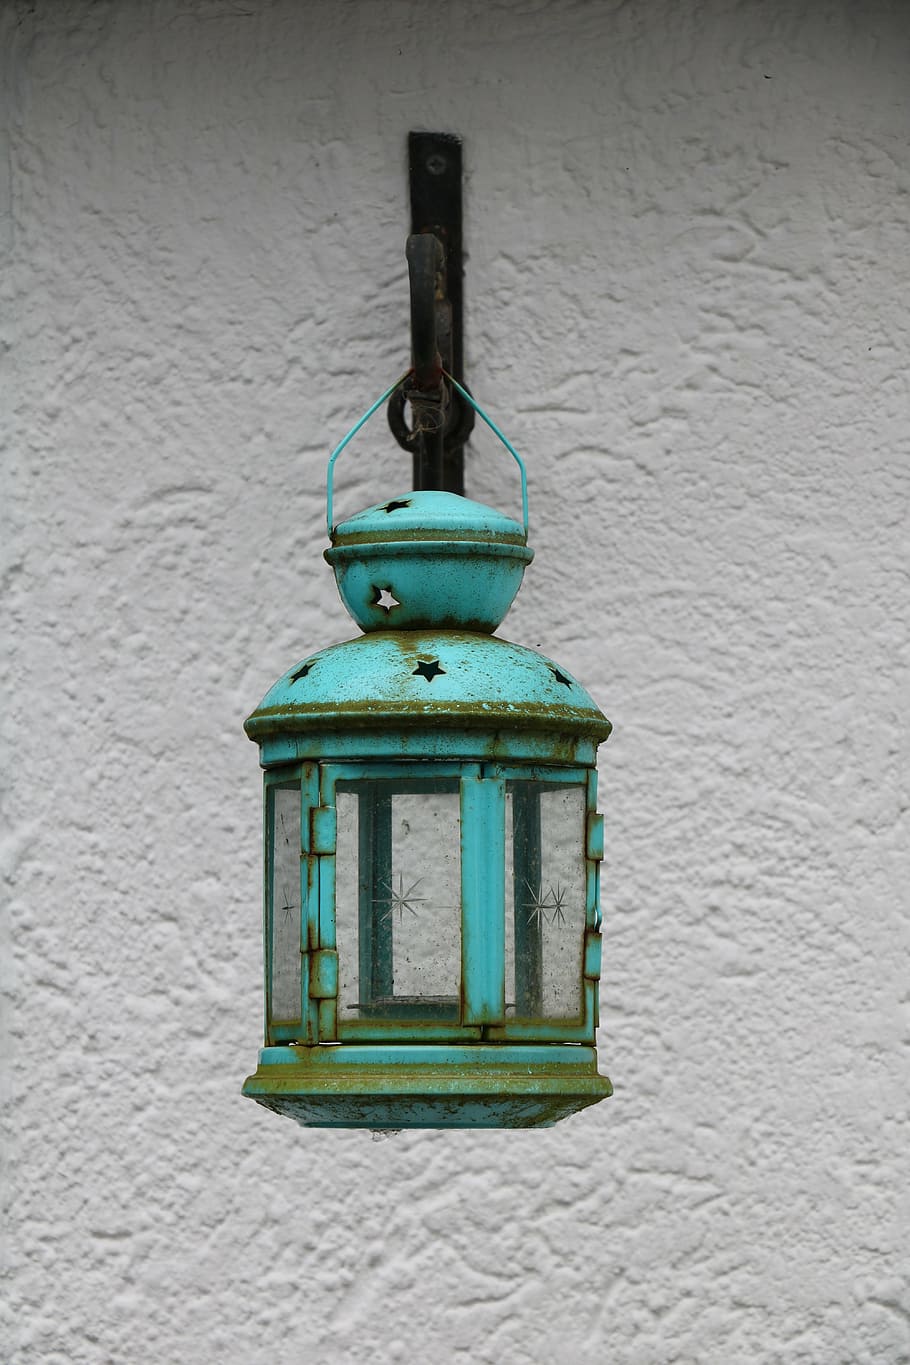 teal wall sconce, lantern, lamp, lamps, turquoise, atmosphere, decoration, built structure, architecture, close-up